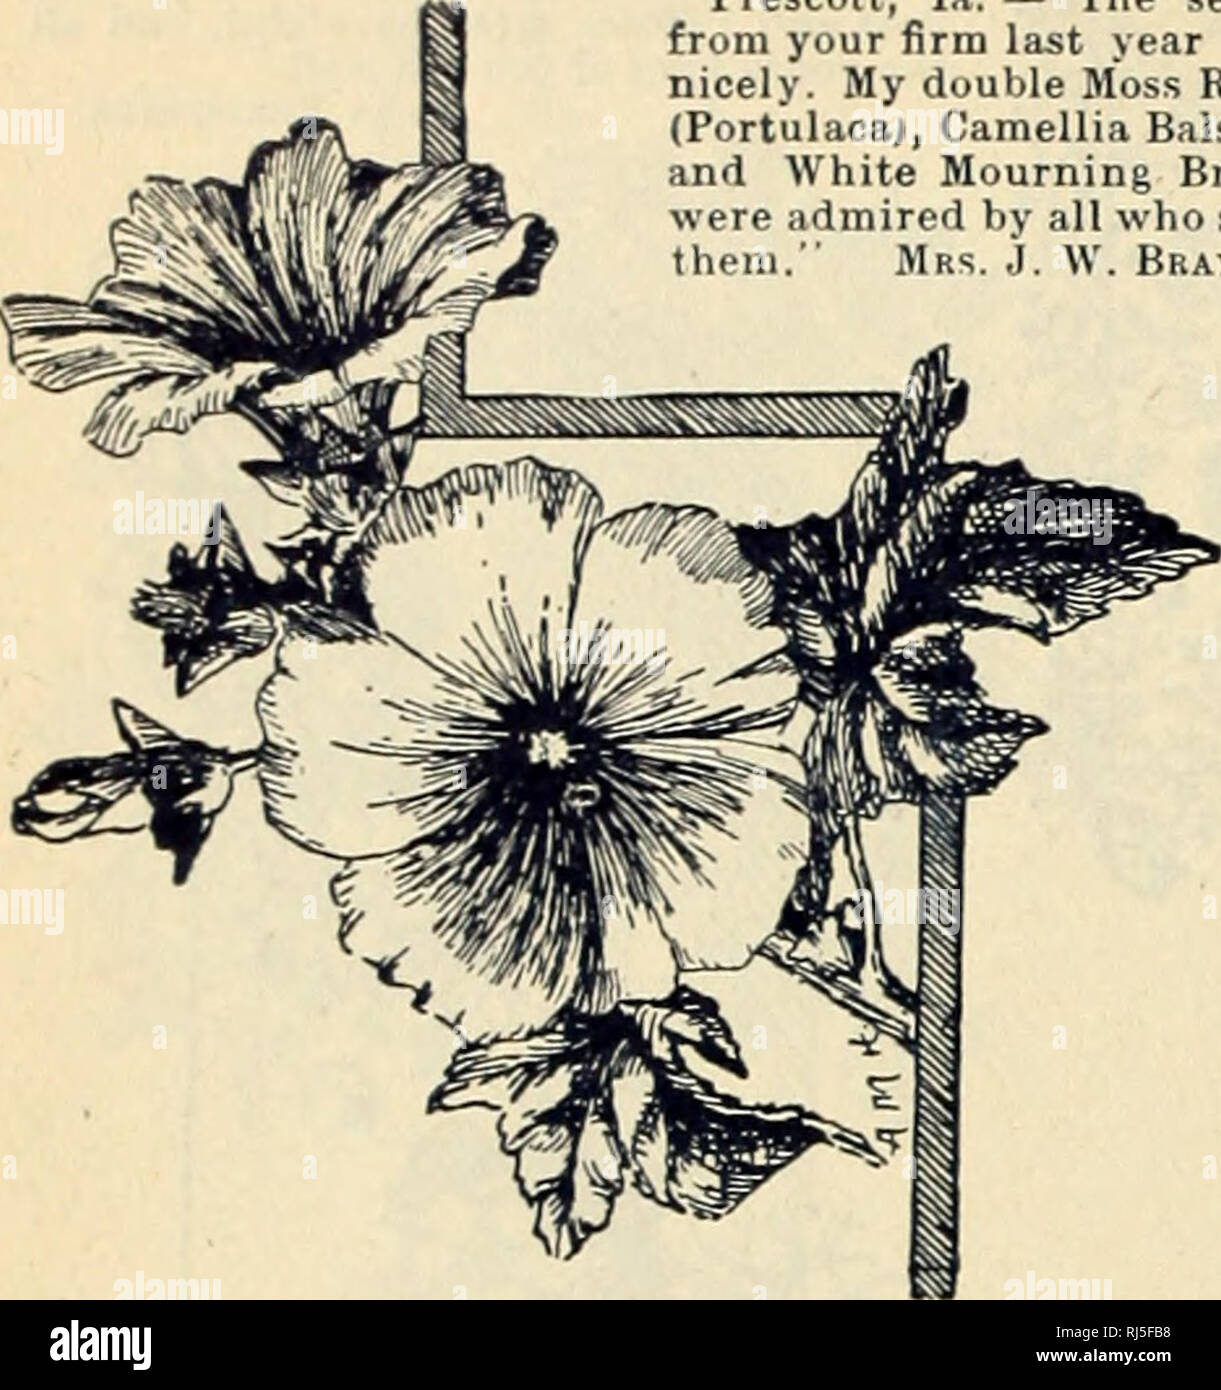 . Choice flower seeds. Flowers Seeds Catalogs; Seeds Catalogs; Vegetables Seeds Catalogs. MISS EMMA V. WHITE. Preseott, la. —&quot;The seeds from your firm last year did nicely. My double Moss Rose (Portulacaj, Camellia Balsam and White Mourning Bride were admired by all who saw them.&quot; Mrs. j. YY. Bray.. LAVATERA. The Lavateras are among the old- fashioned annuals that well deserve to be restored to more general favor. The blossoms are large and cup-shaped, measuring from one and a half to two inches across, and appear in showy clusters. The plant is somewhat strag- gling and the foliage  Stock Photo